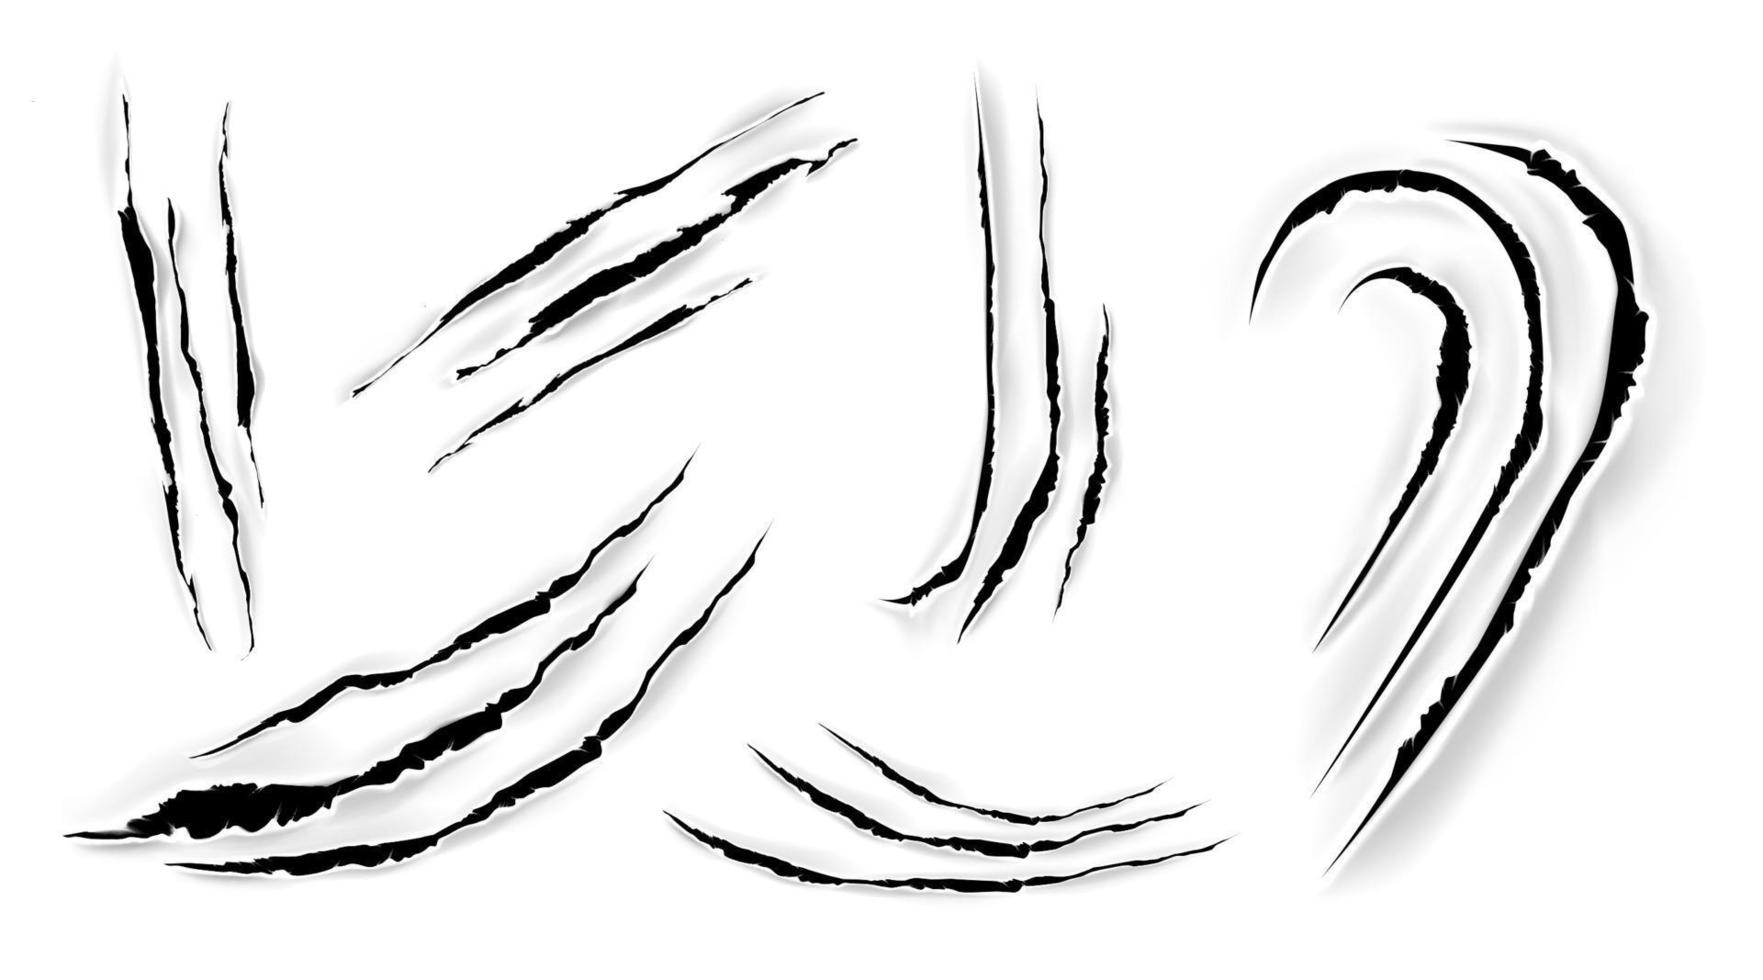 Cat claw scratches, scrapes on white paper vector